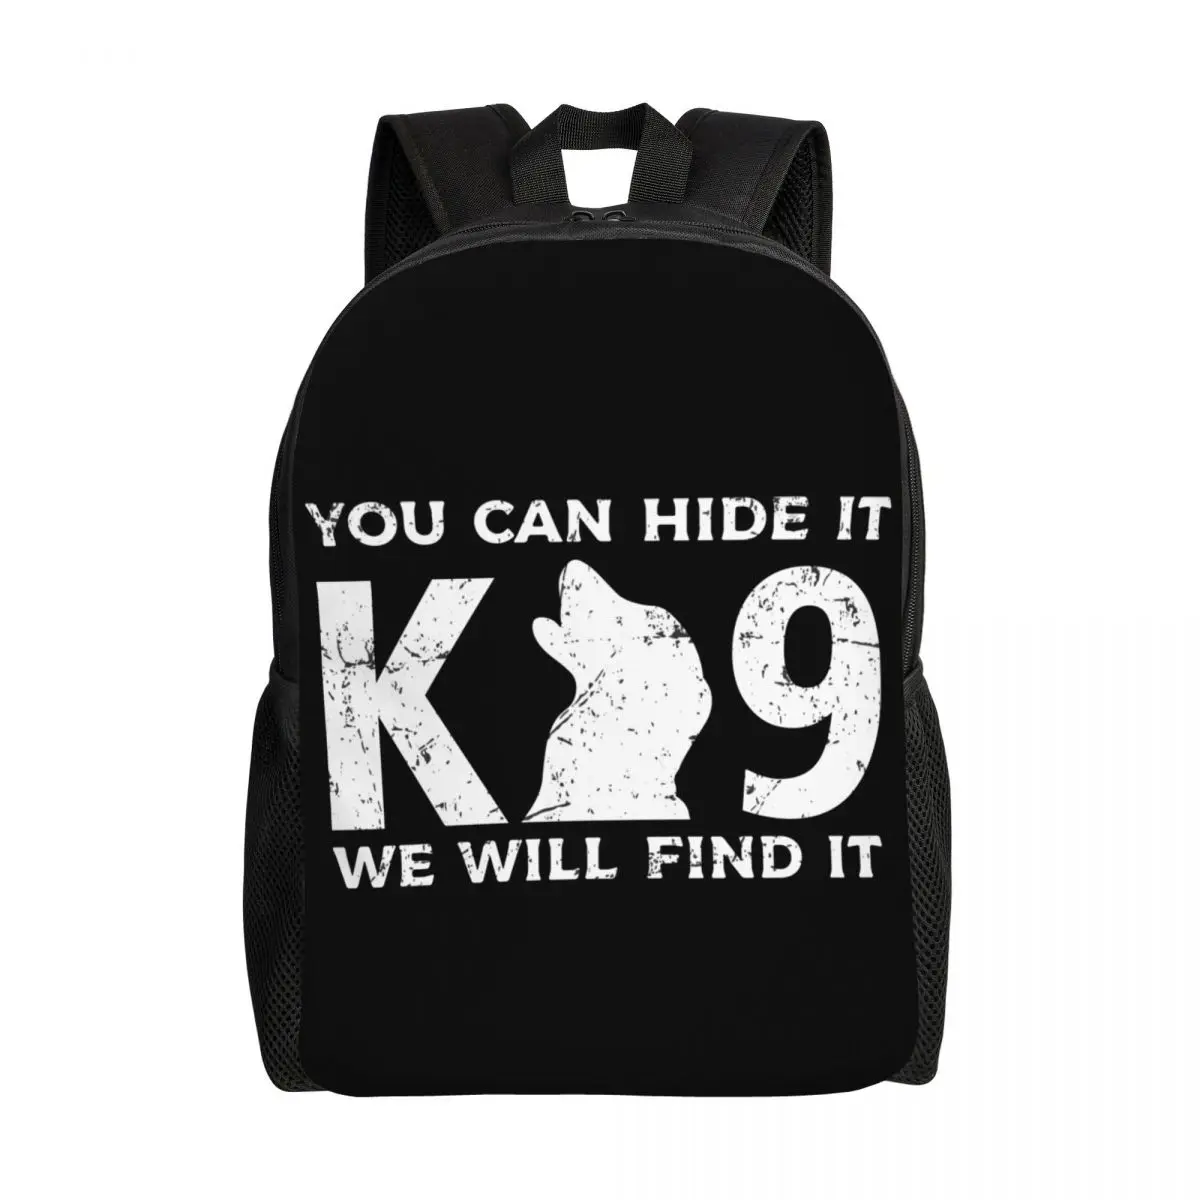 

K9 You Can Hide It We Will Find It Backpack for Women Men School College Student Bookbag Fits 15 Inch Laptop Bags